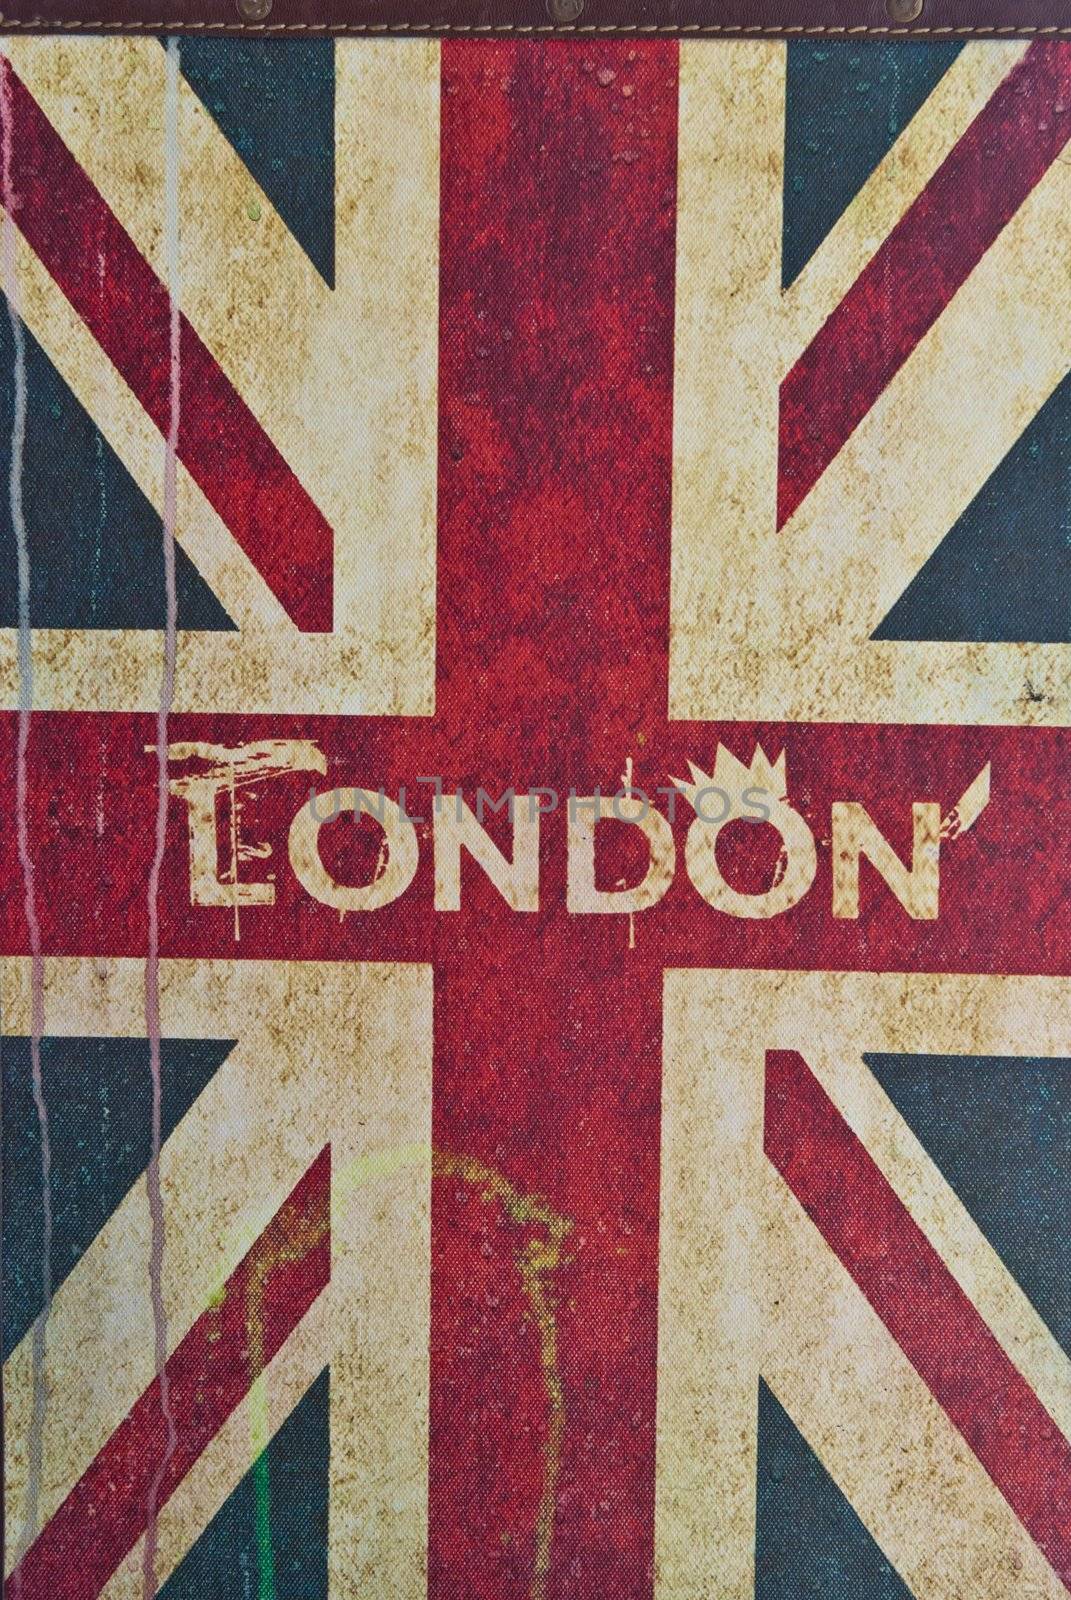 UK flag with london in th middle, can be use for background purposes.